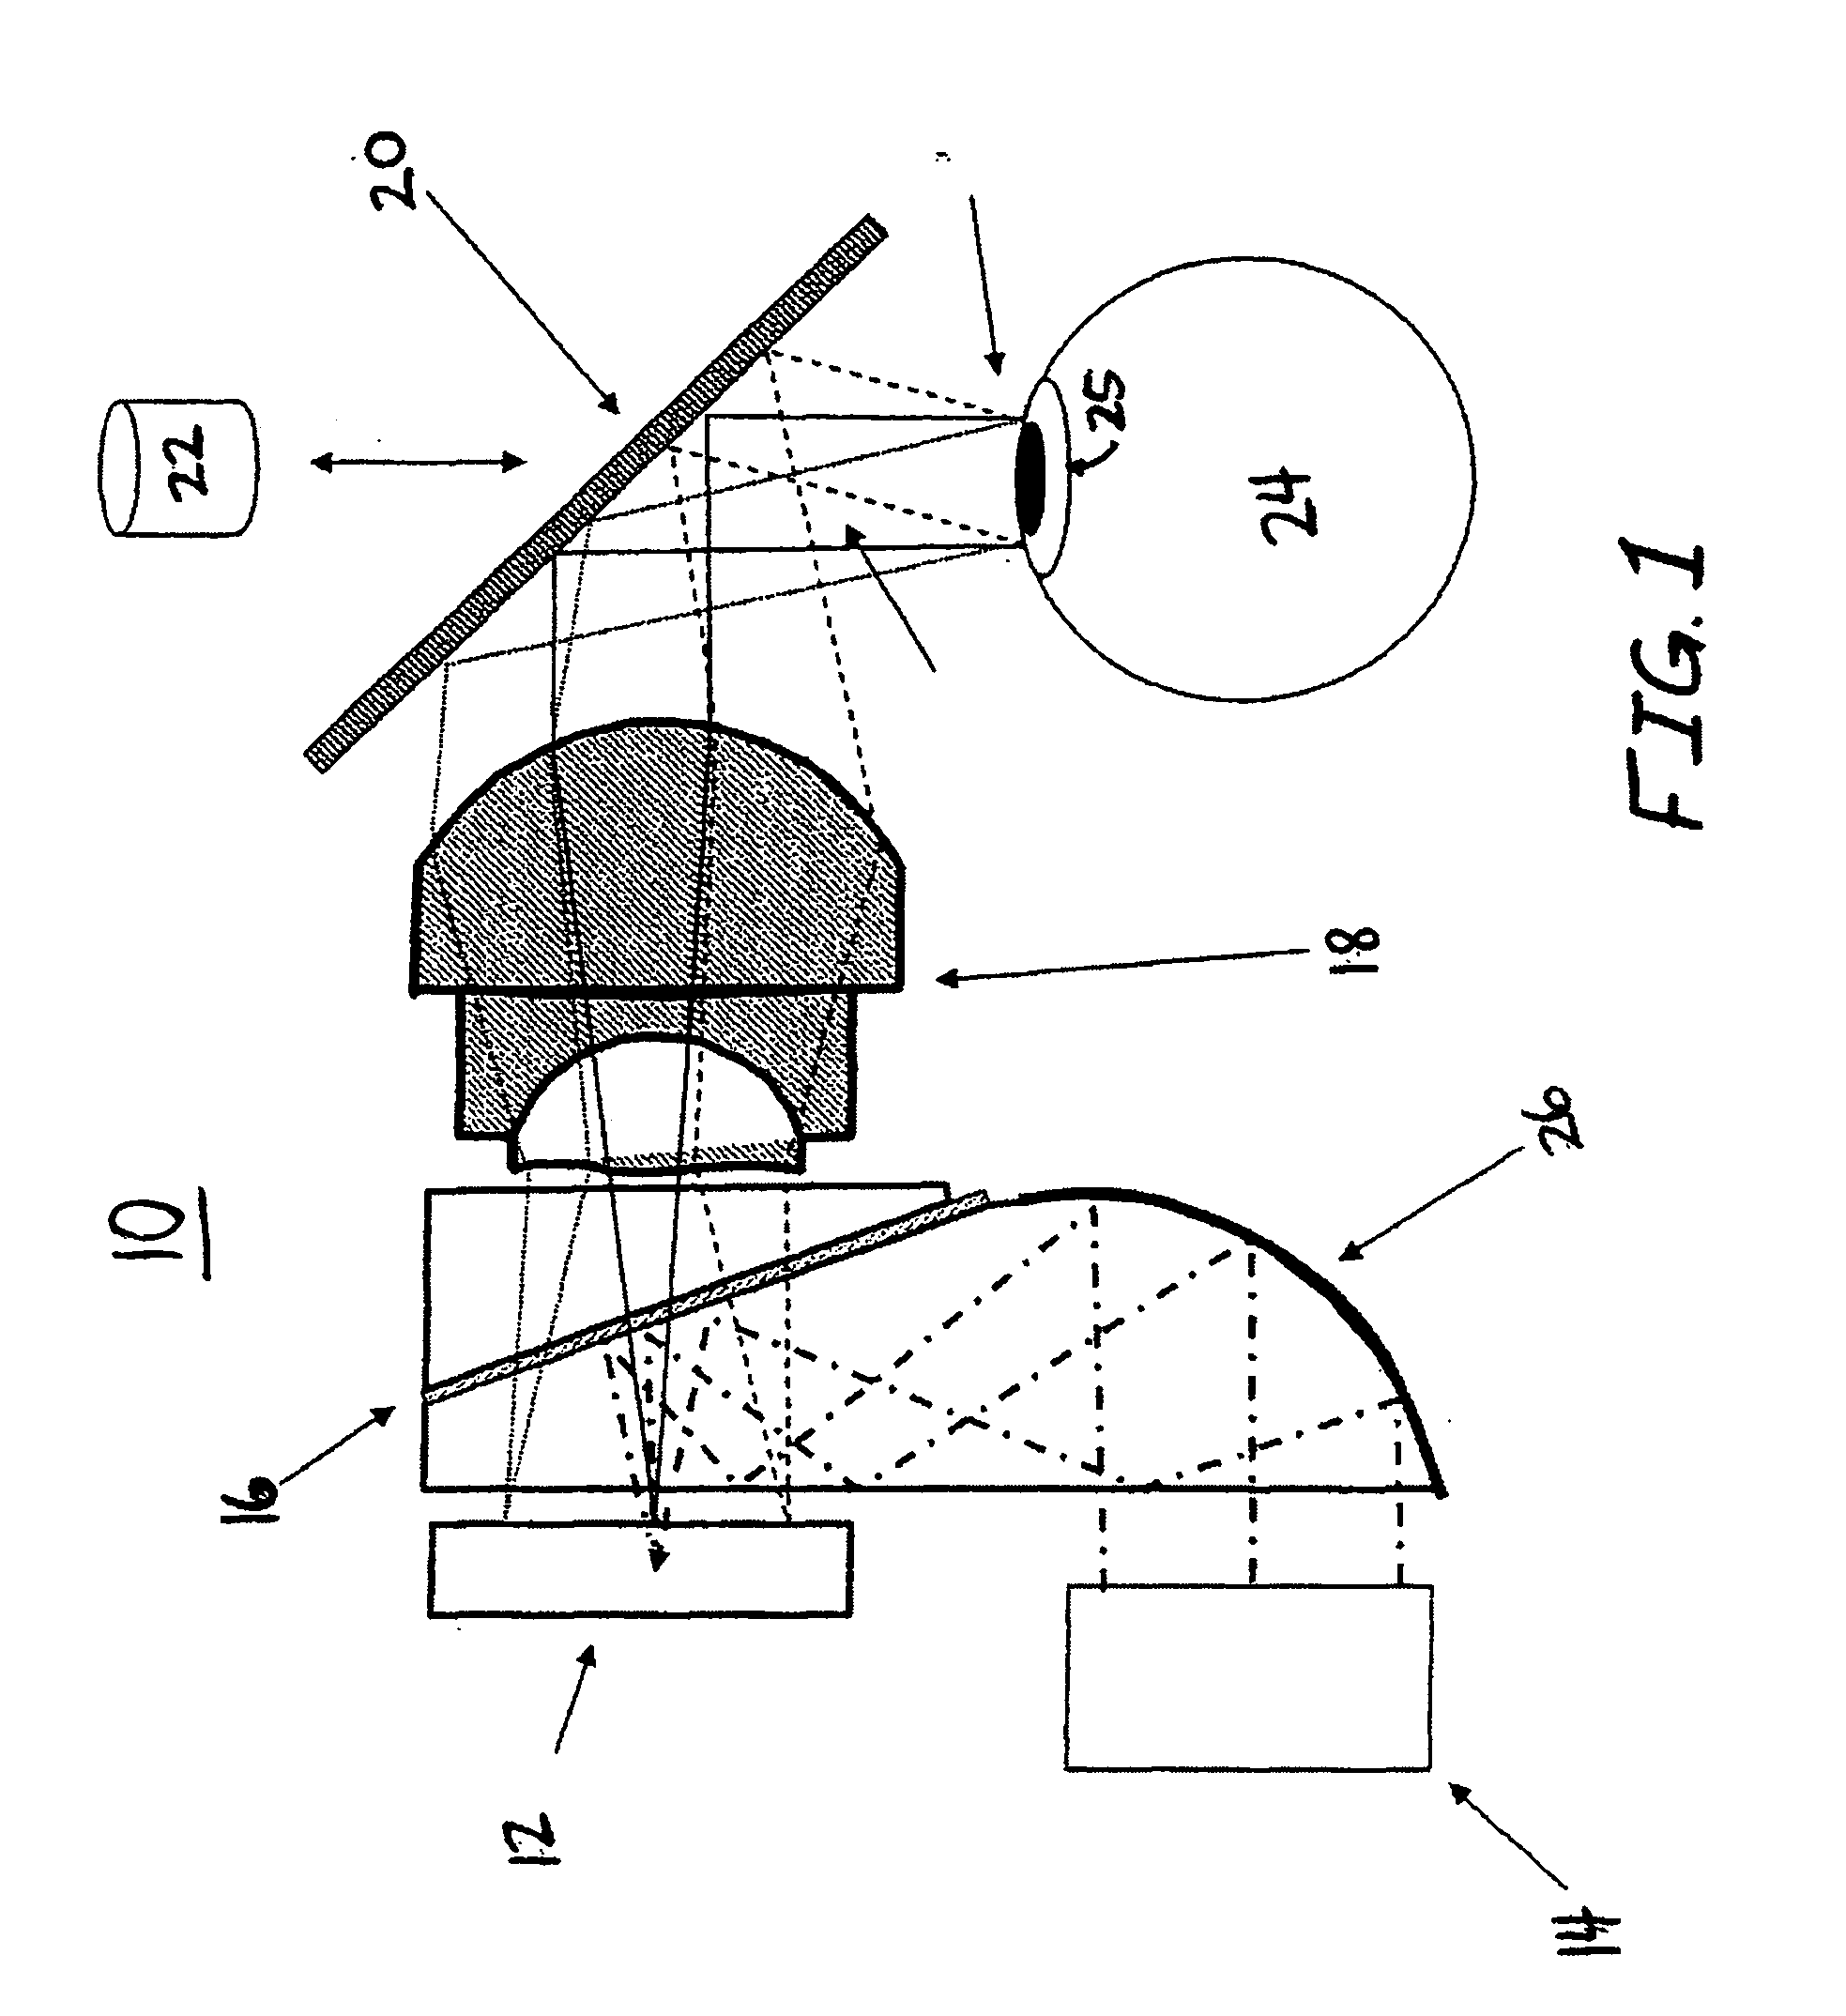 Wearable display system